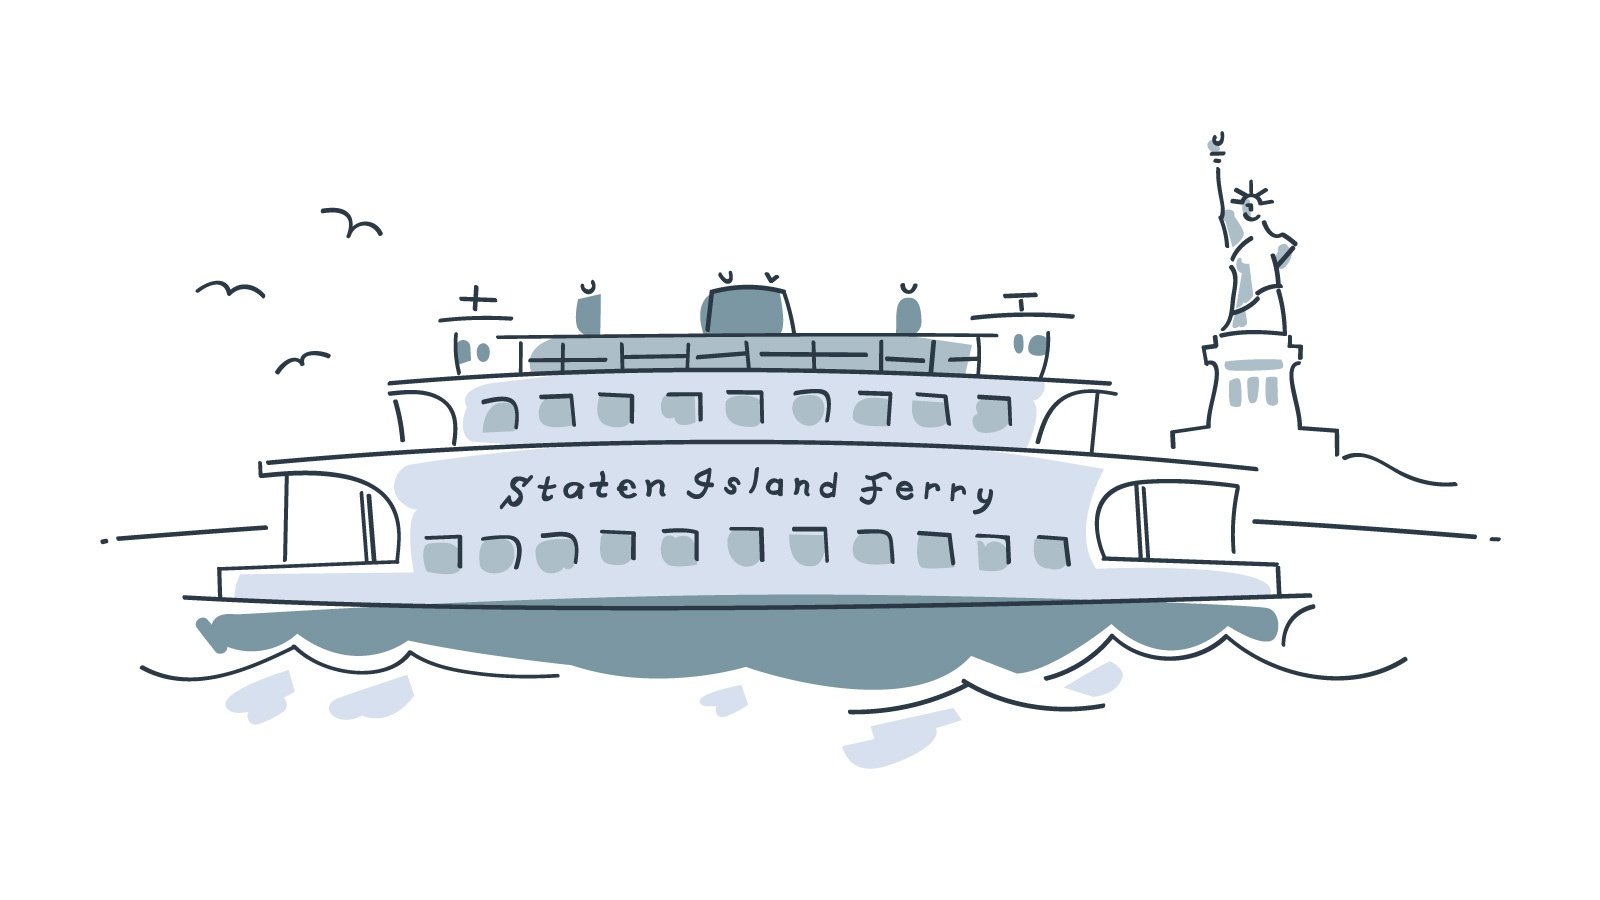 Illustration of a the Staten Island Ferry